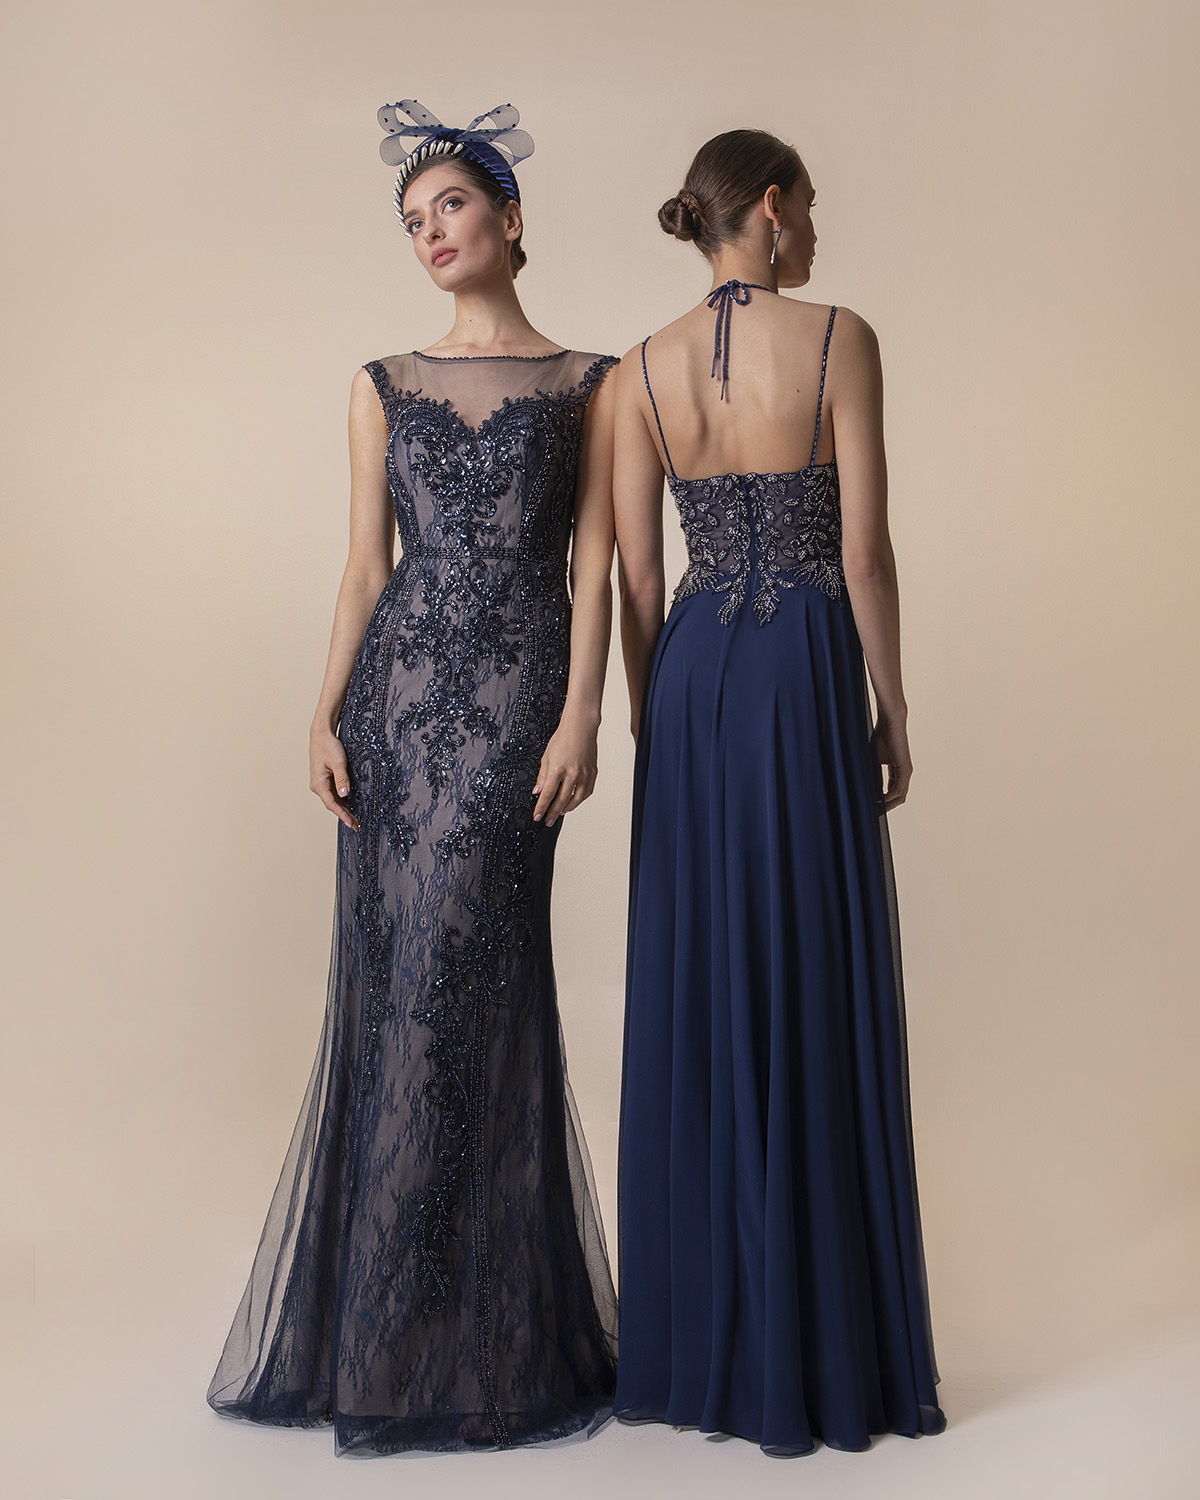 Long evening tulle fully beaded dress with lace